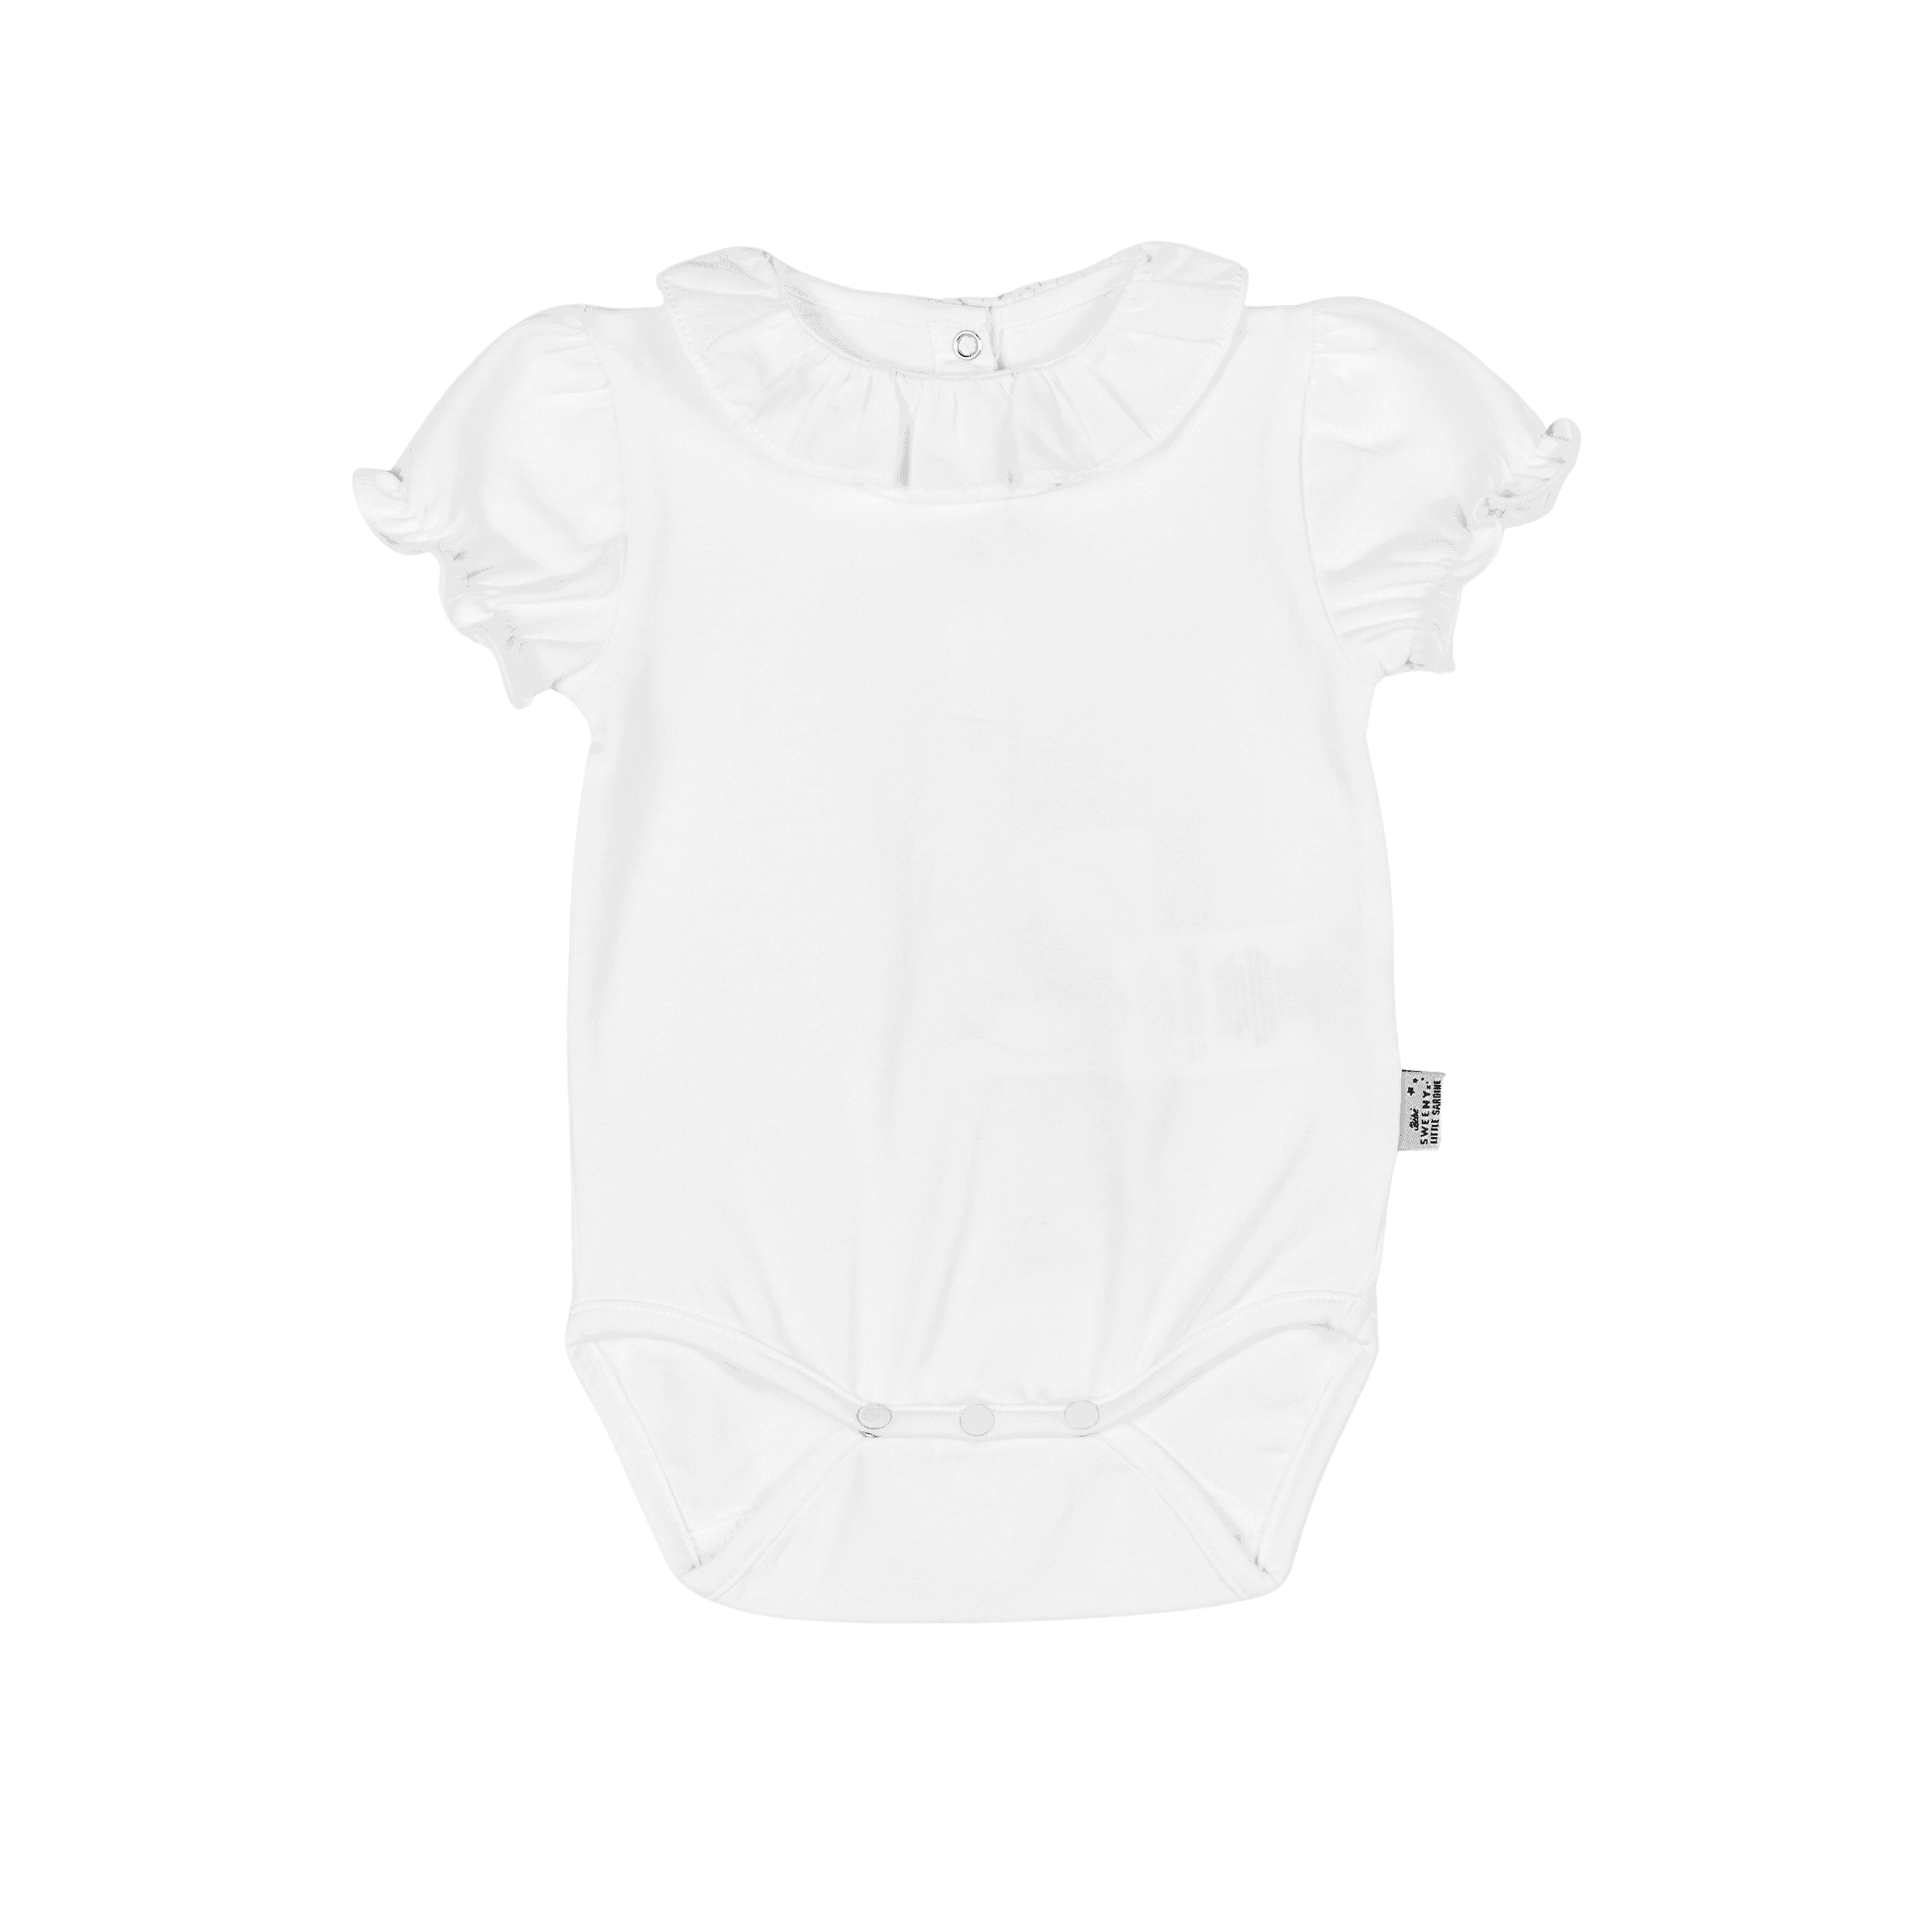 Girls White Cotton Bodysuit With Lace Collar